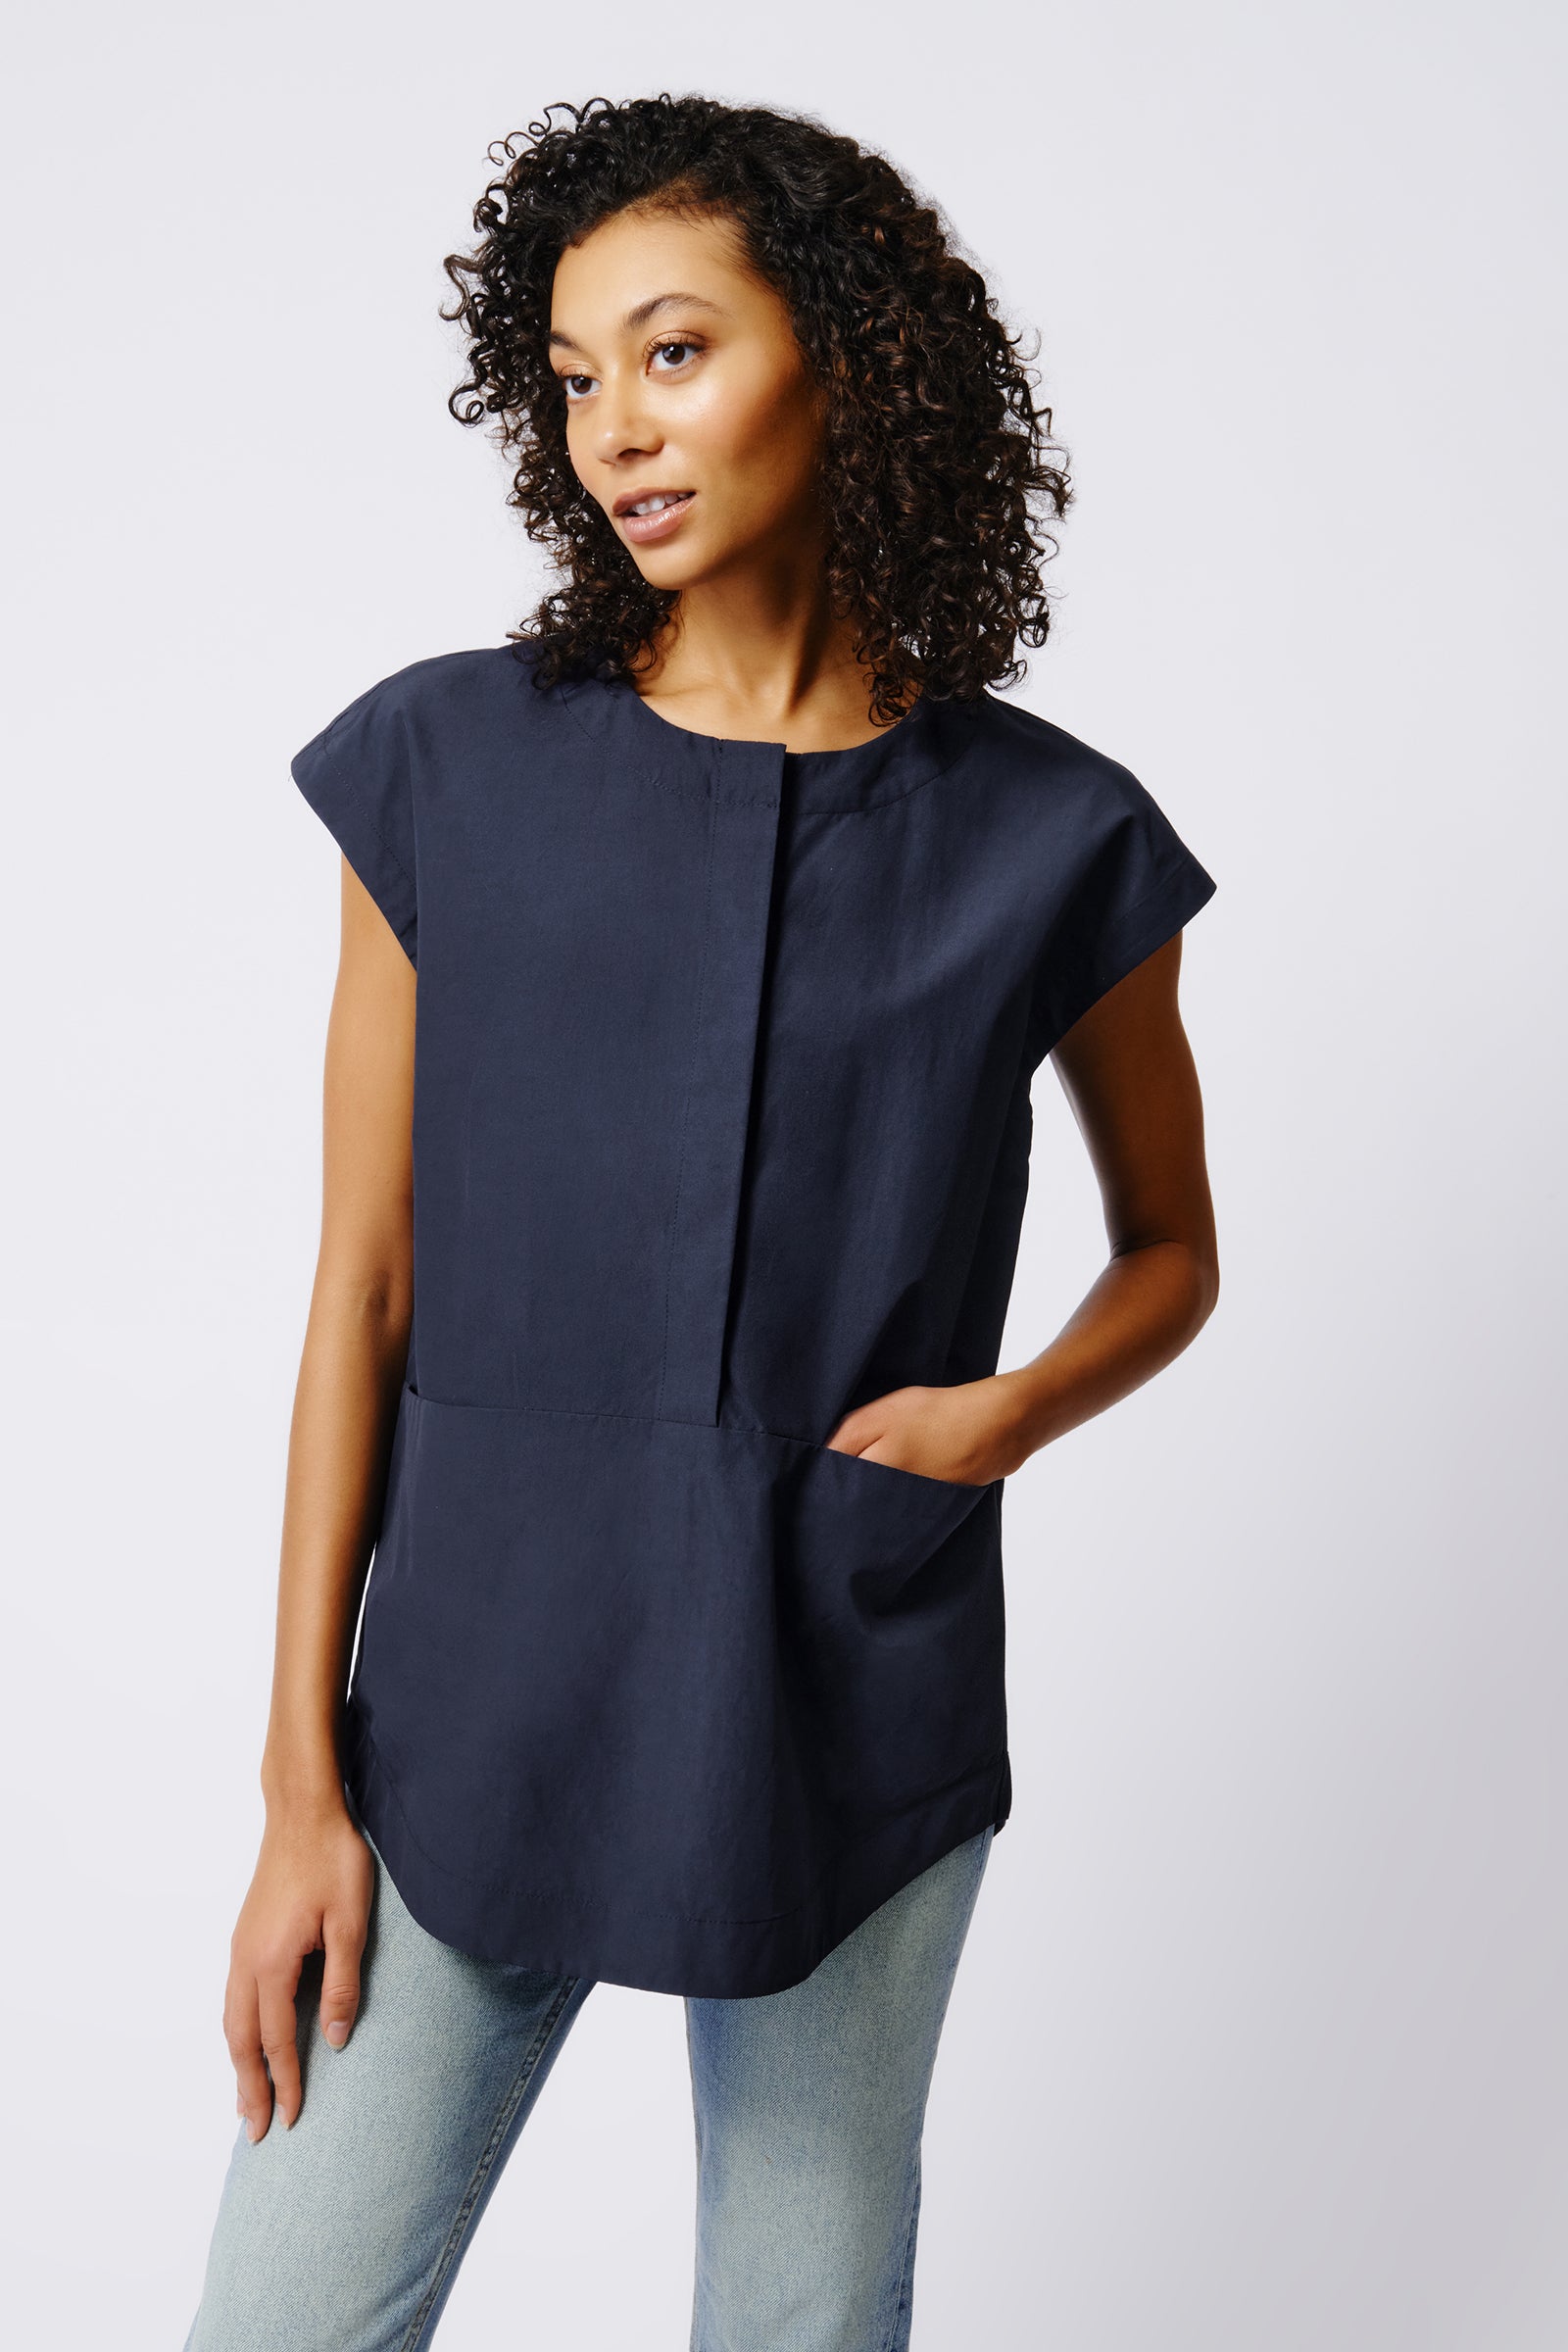 Shop All Sale Styles Before They're Gone – KAL RIEMAN